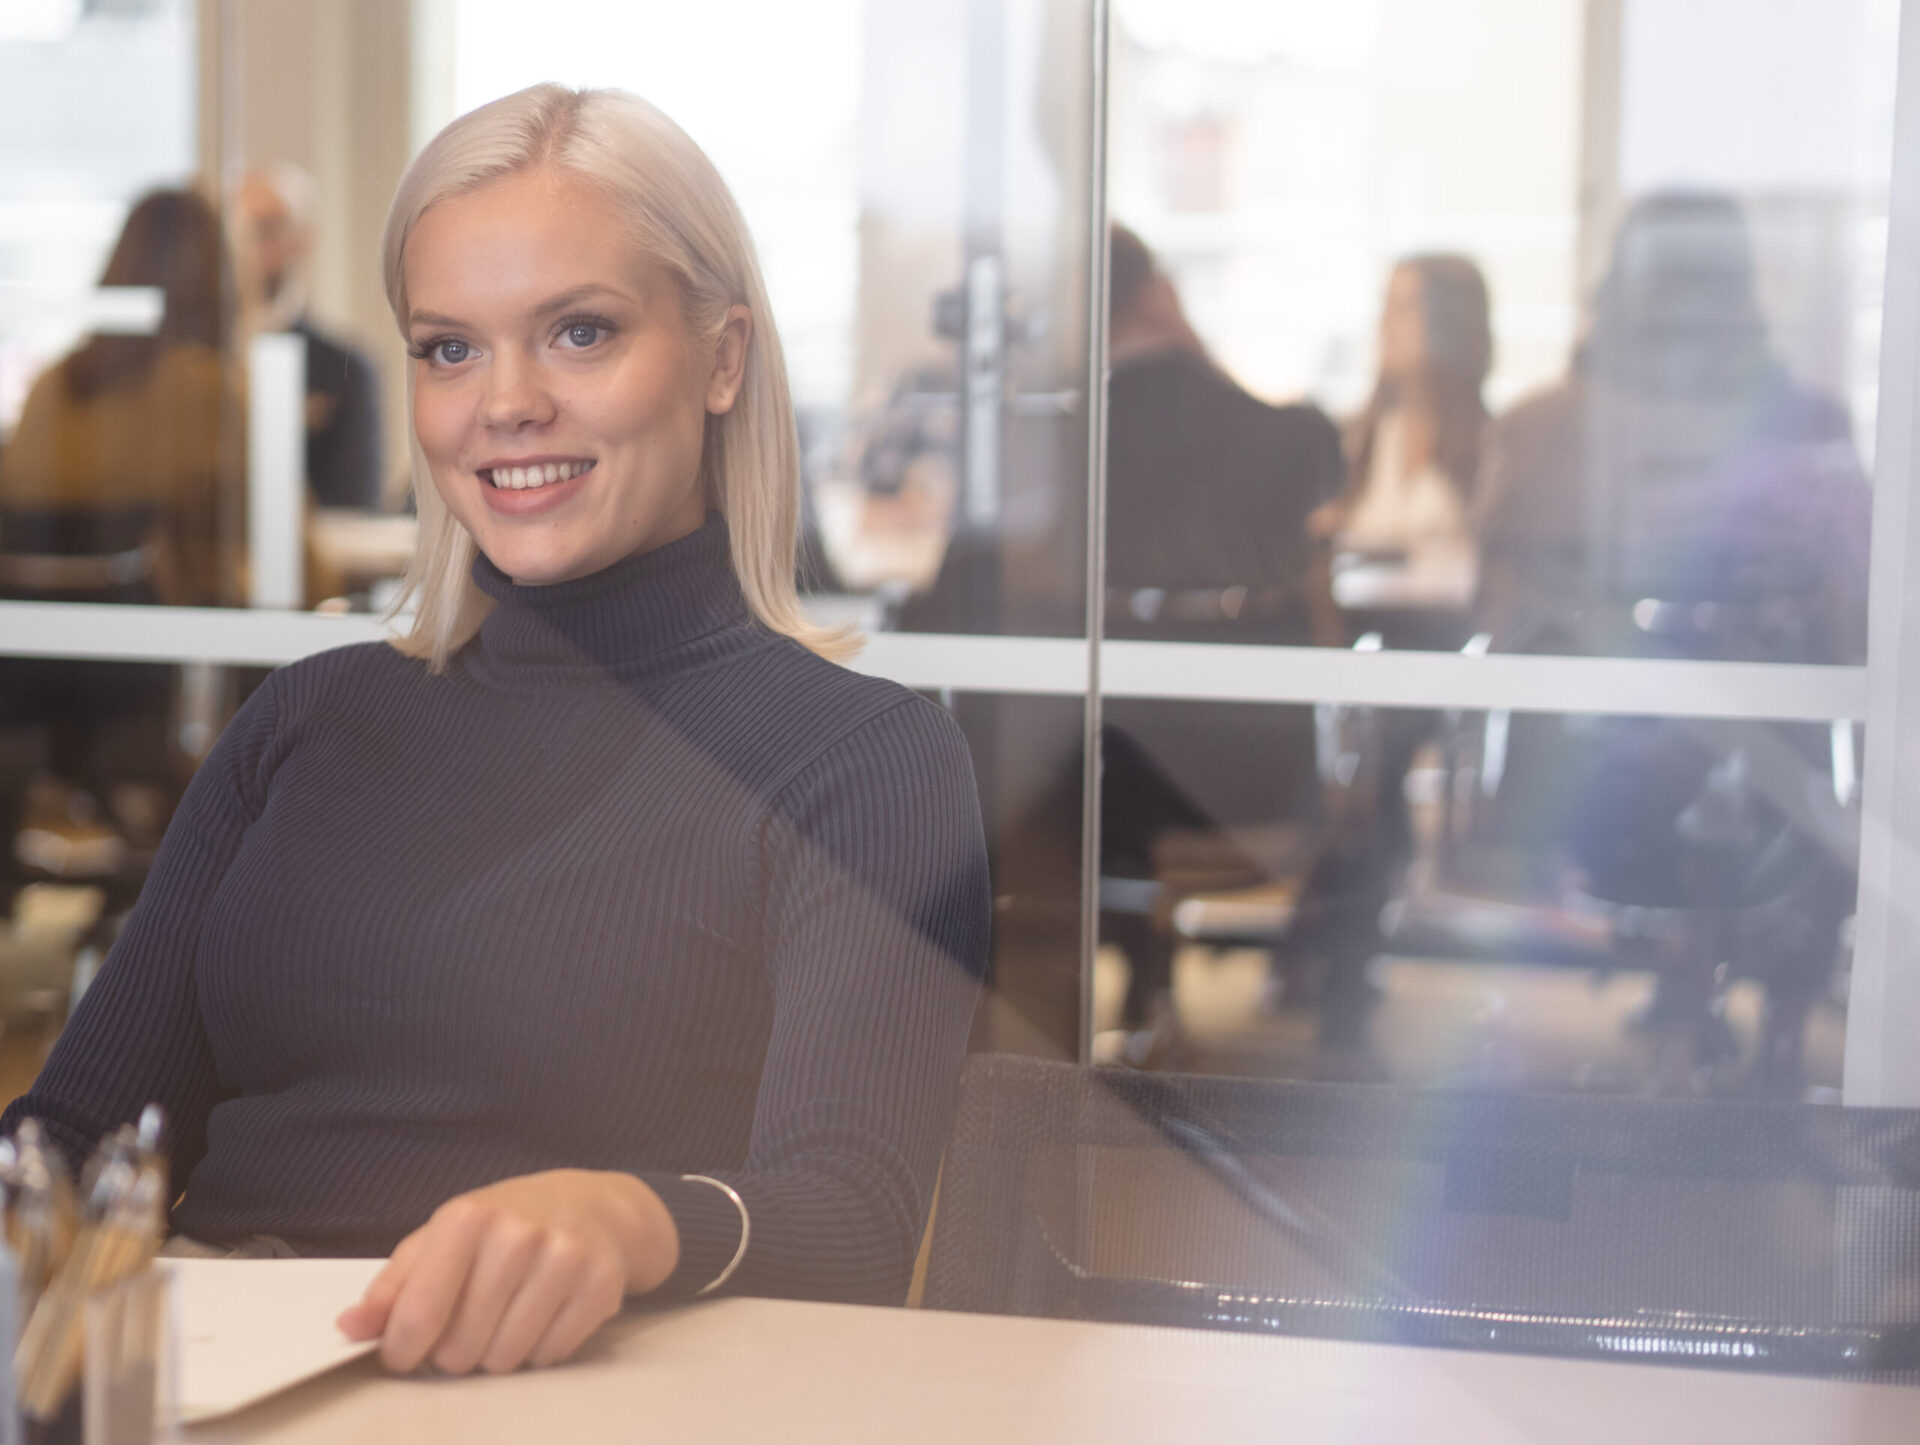 Woman smiling in the meeting room